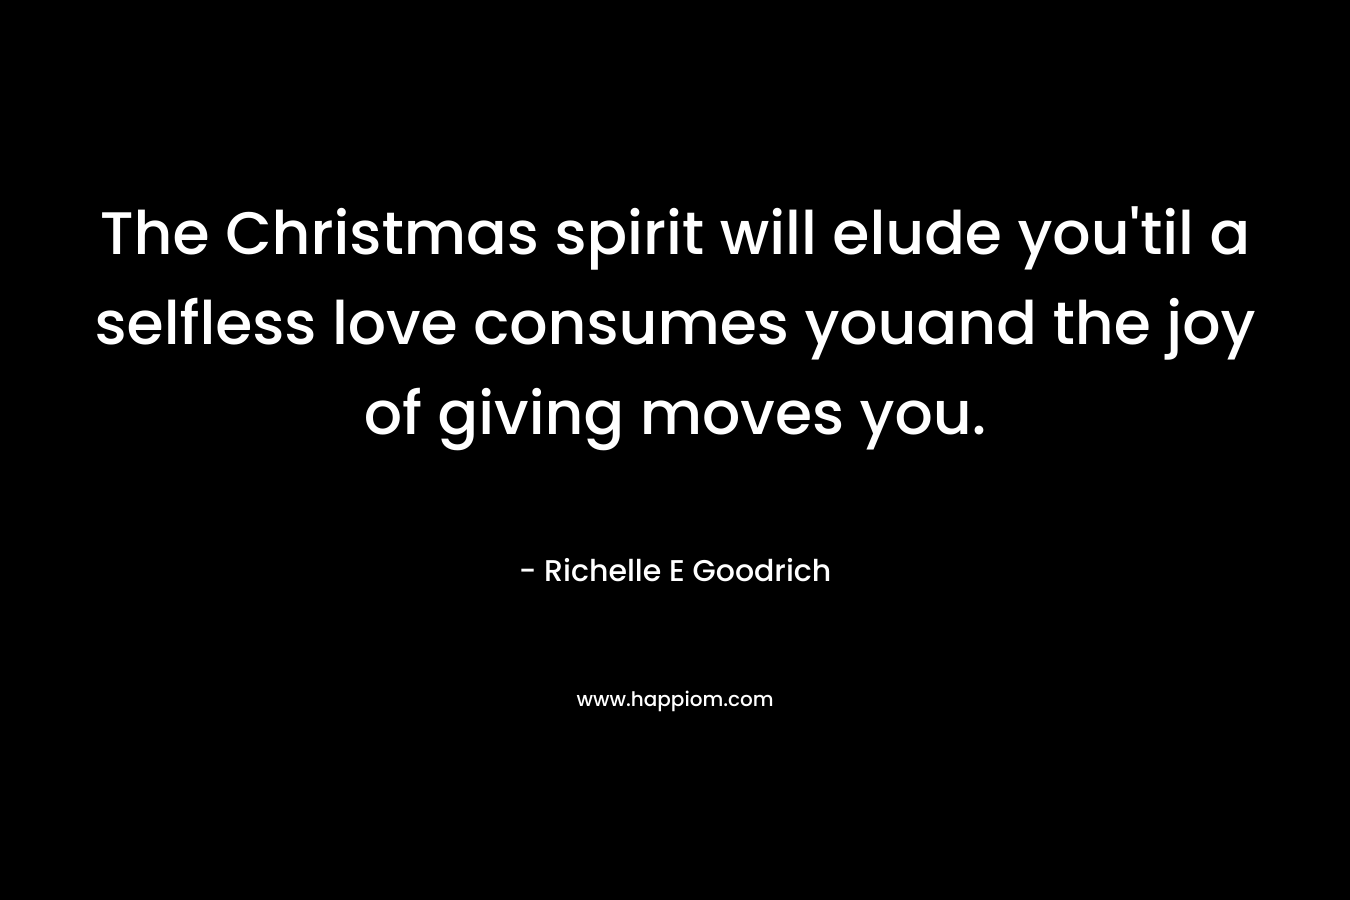 The Christmas spirit will elude you’til a selfless love consumes youand the joy of giving moves you. – Richelle E Goodrich